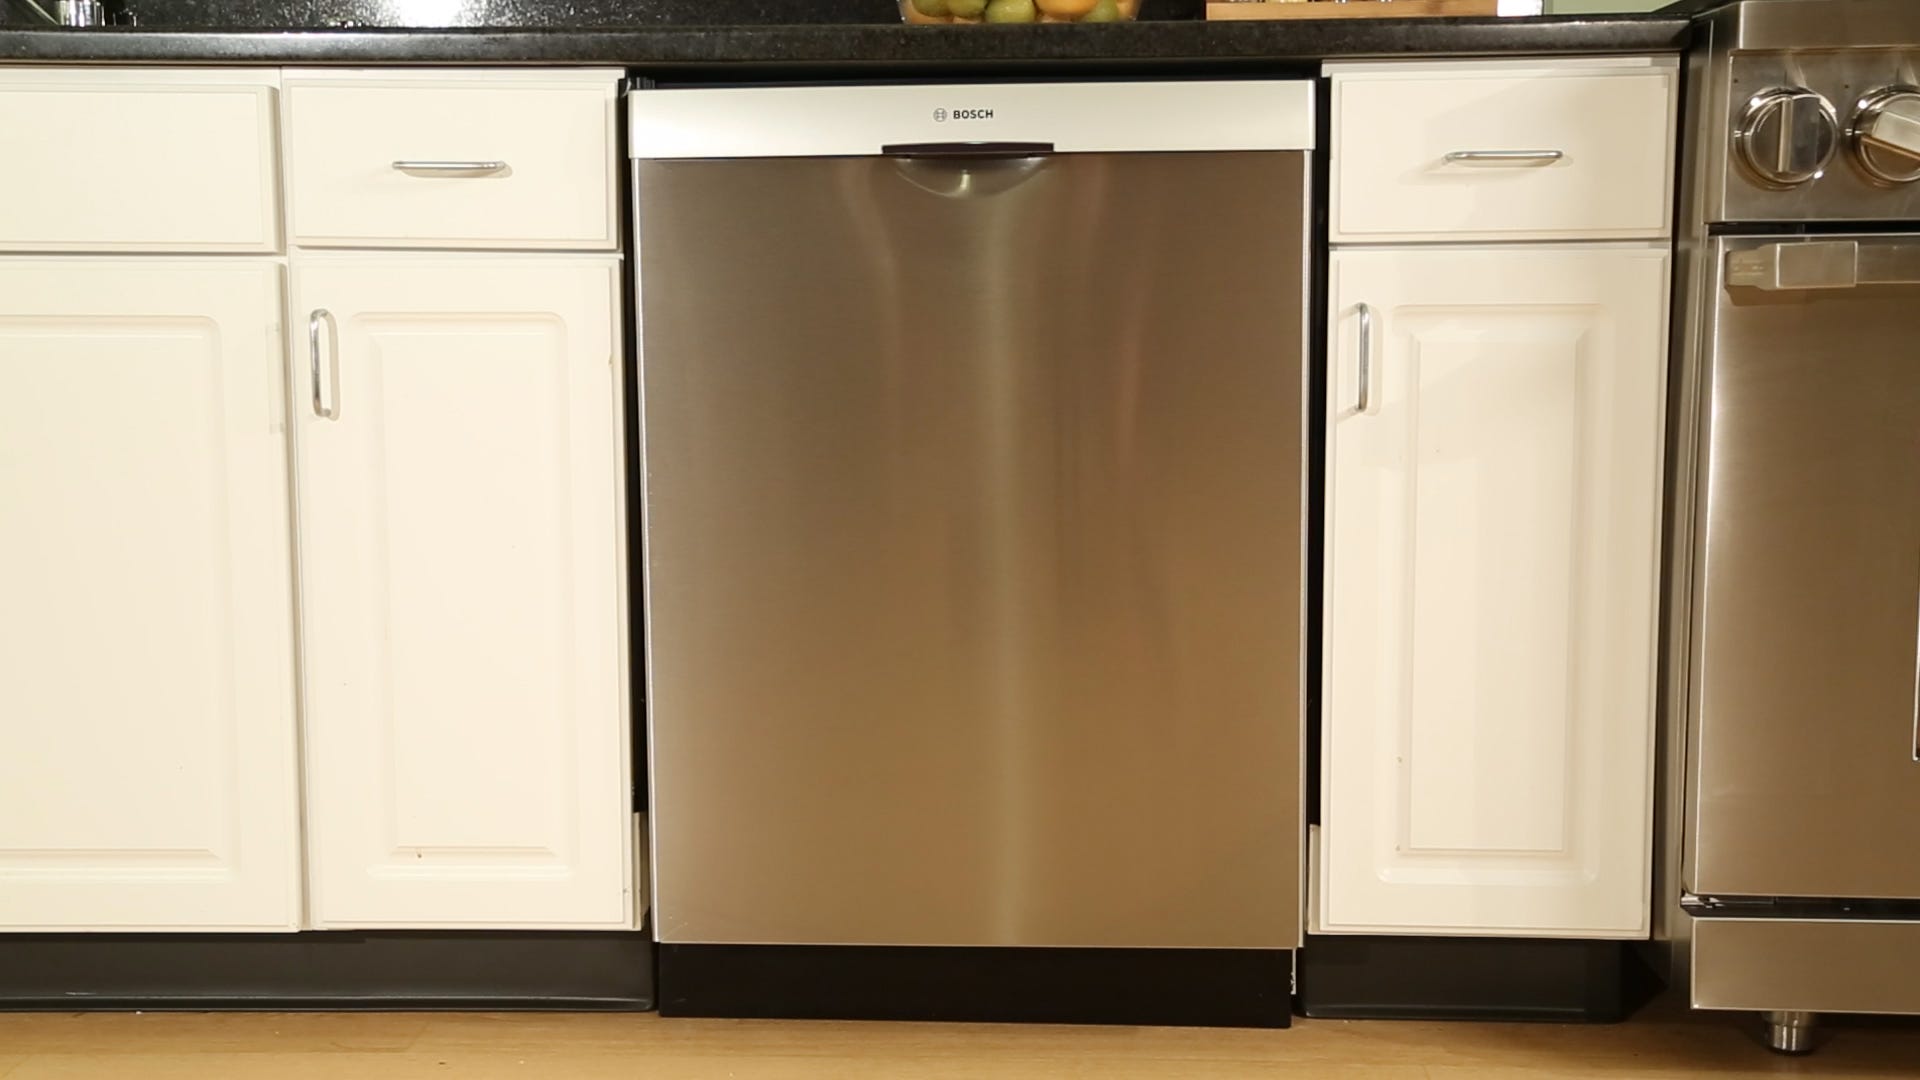 Bosch Shs63vl5uc Review A Frustrating Dishwasher That Comes Through In The Clutch Page 2 Cnet